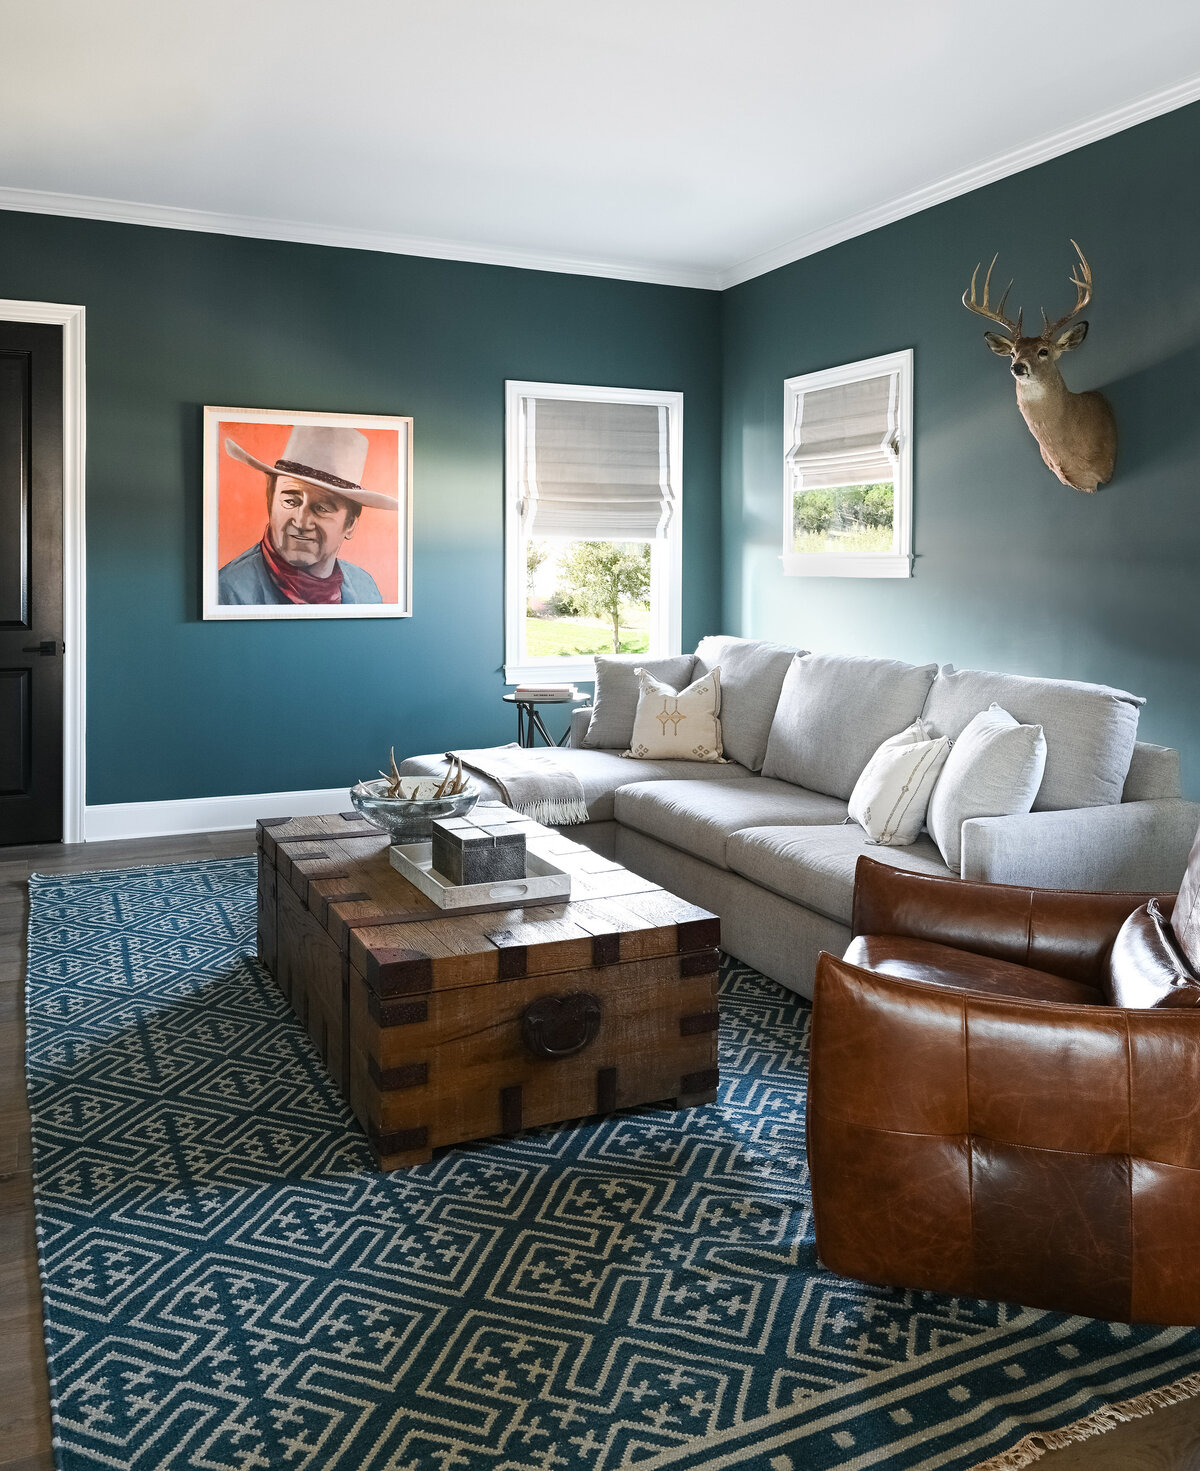 blue green dark walls and leather chair